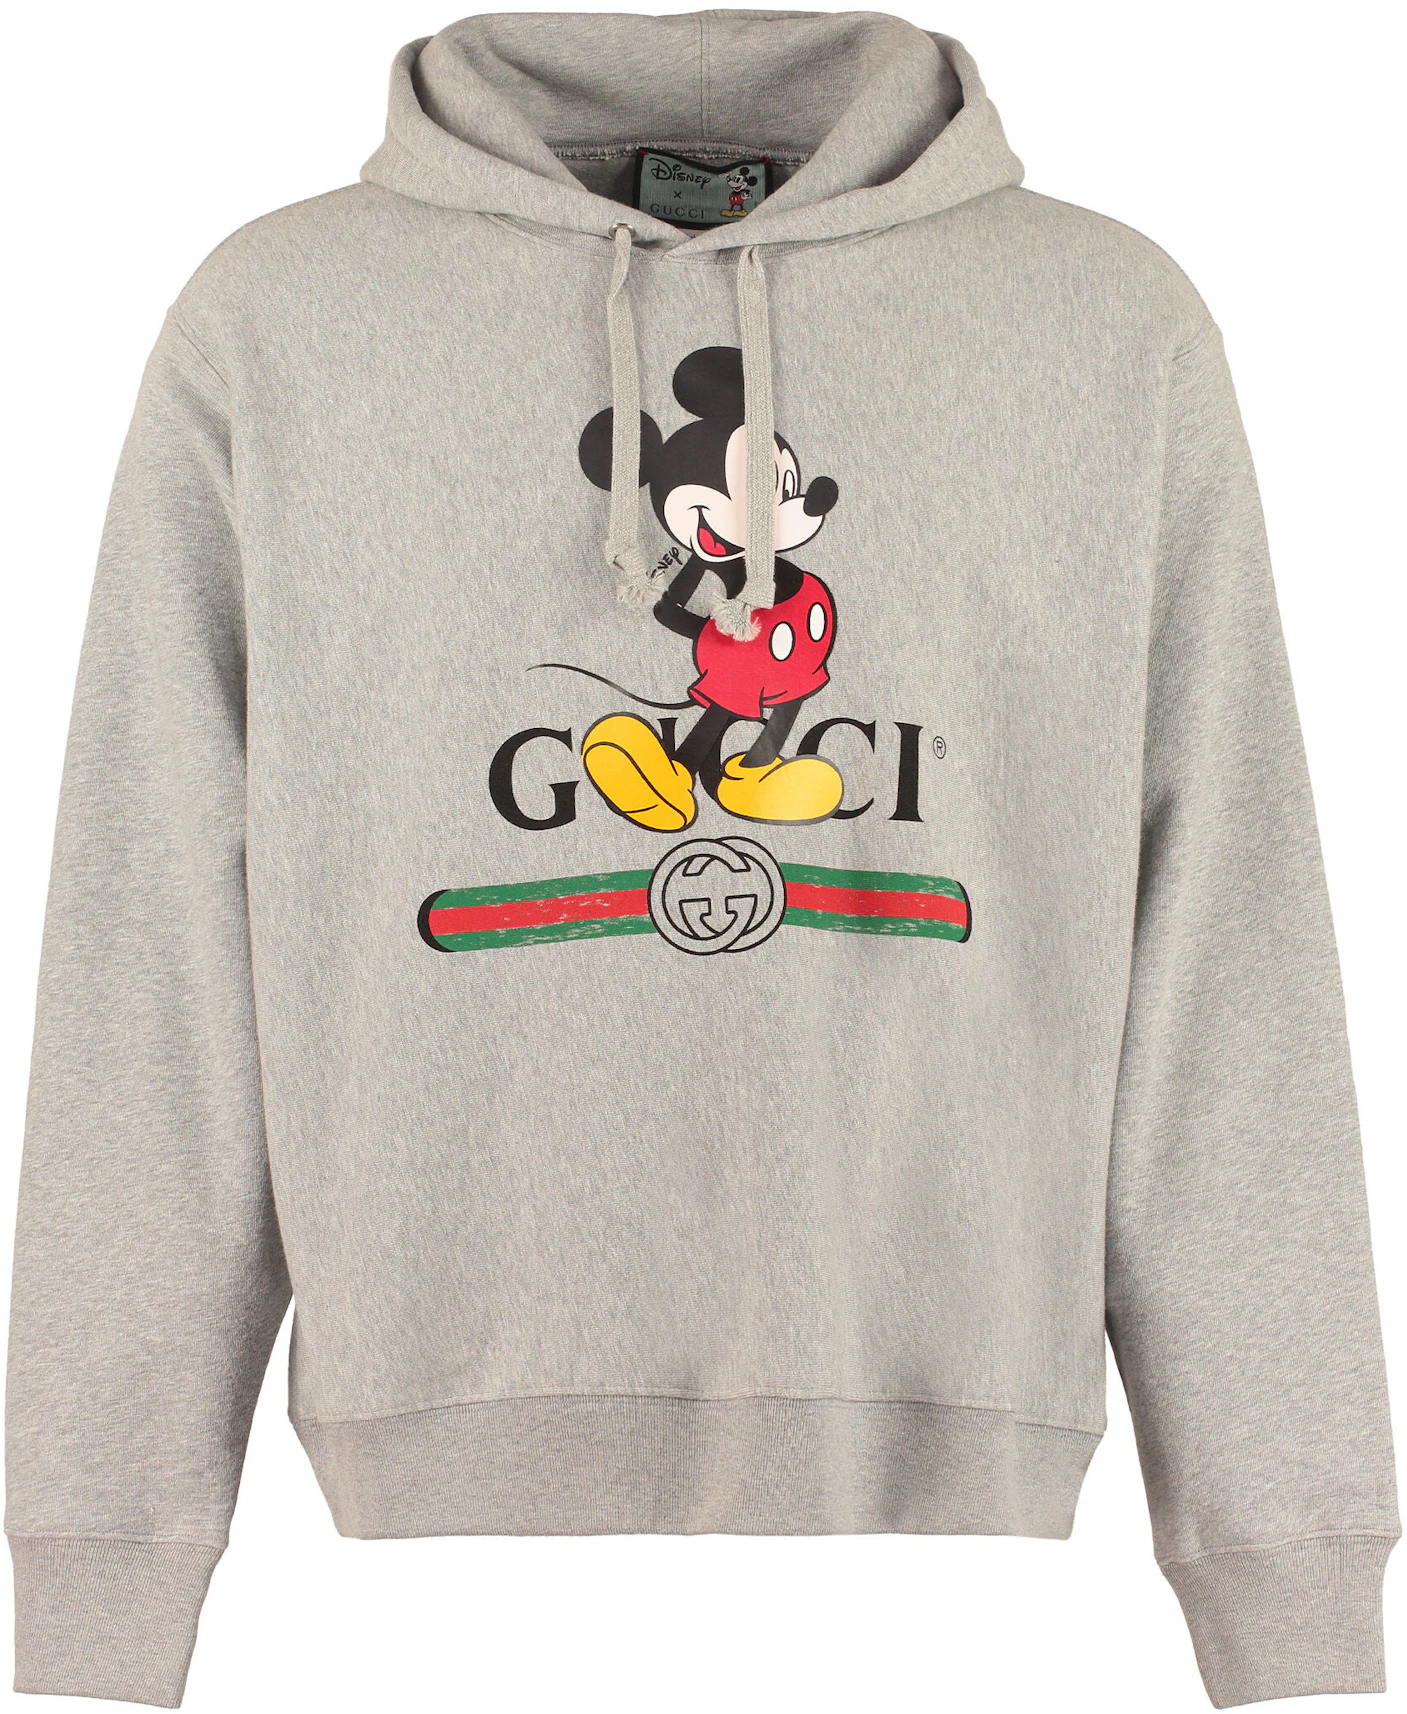 Gucci x Disney Mickey Mouse Hoodie Grey - US